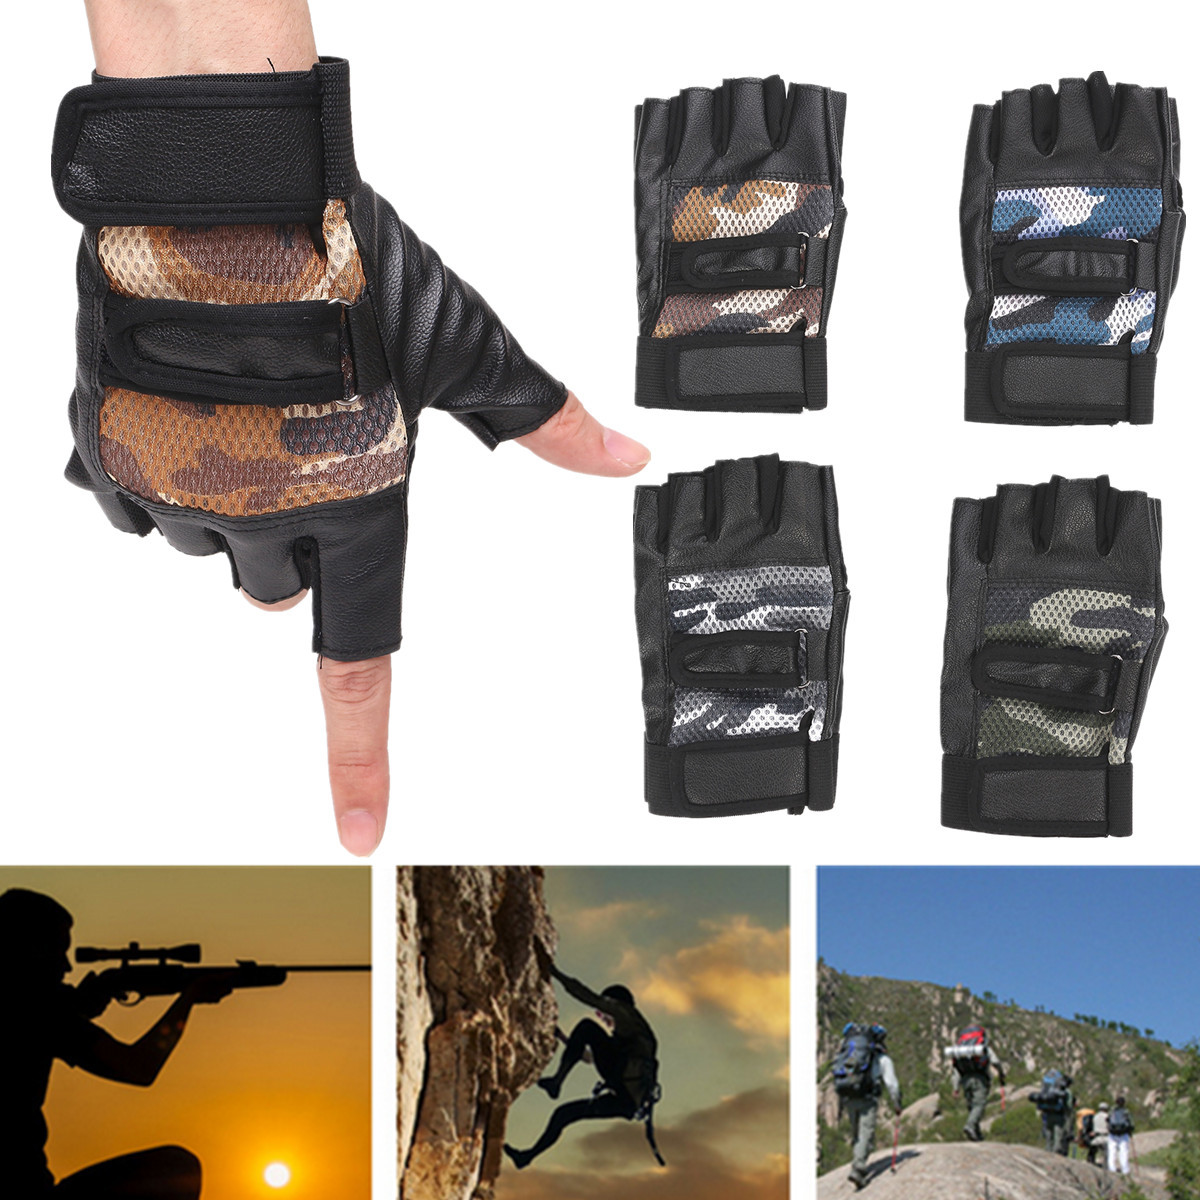 Unisex-Mesh-Artificial-Leather-Cycling-Outdoor-Gloves-Gym-Fitness-Wrist-Support-Wraps-Bike-Mittens-1085963